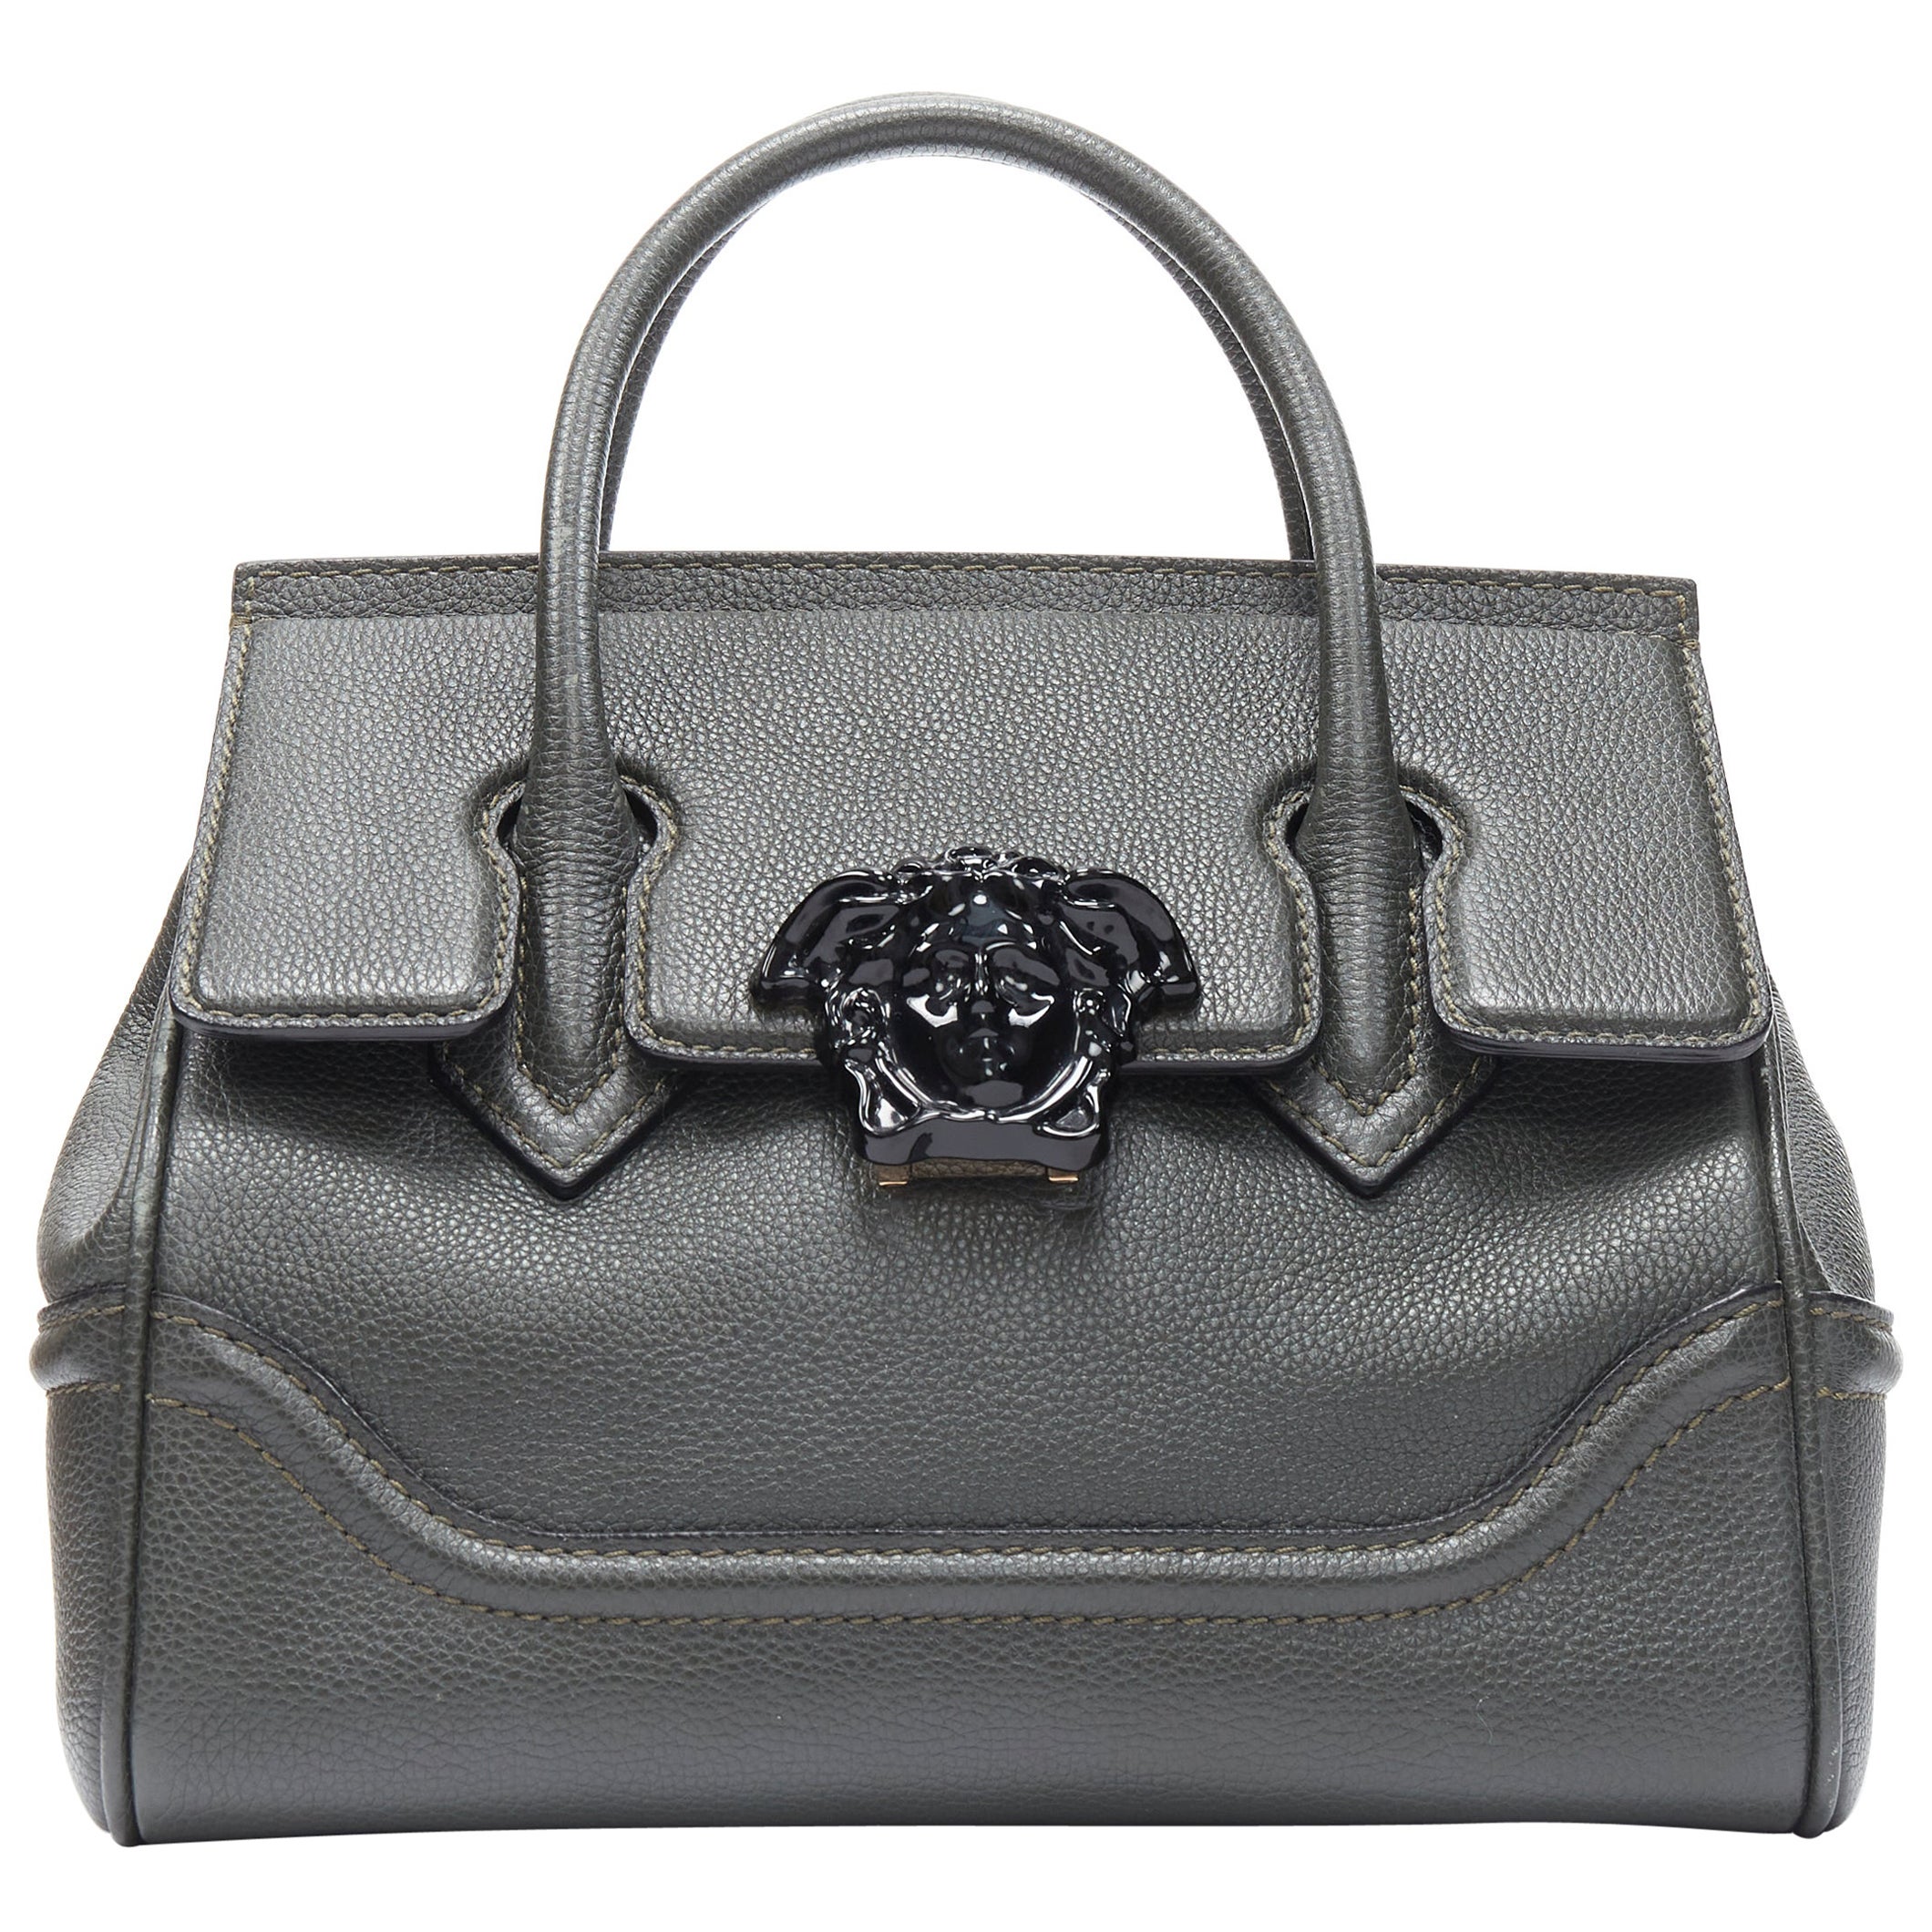 Versace Palazzo Empire - 2 For Sale on 1stDibs